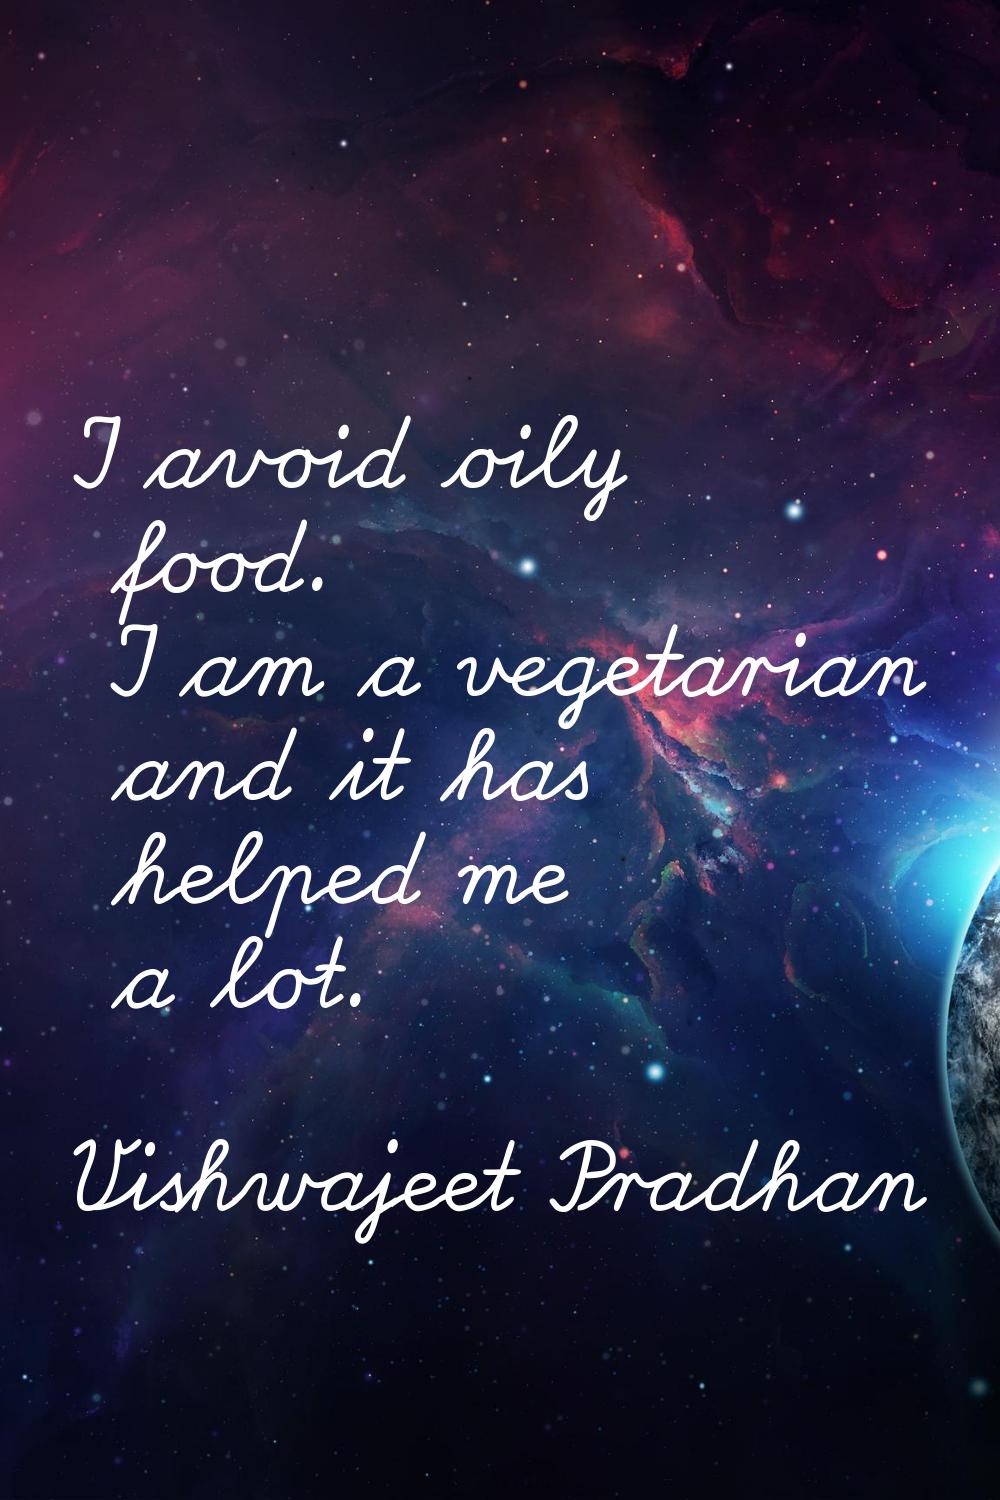 I avoid oily food. I am a vegetarian and it has helped me a lot.